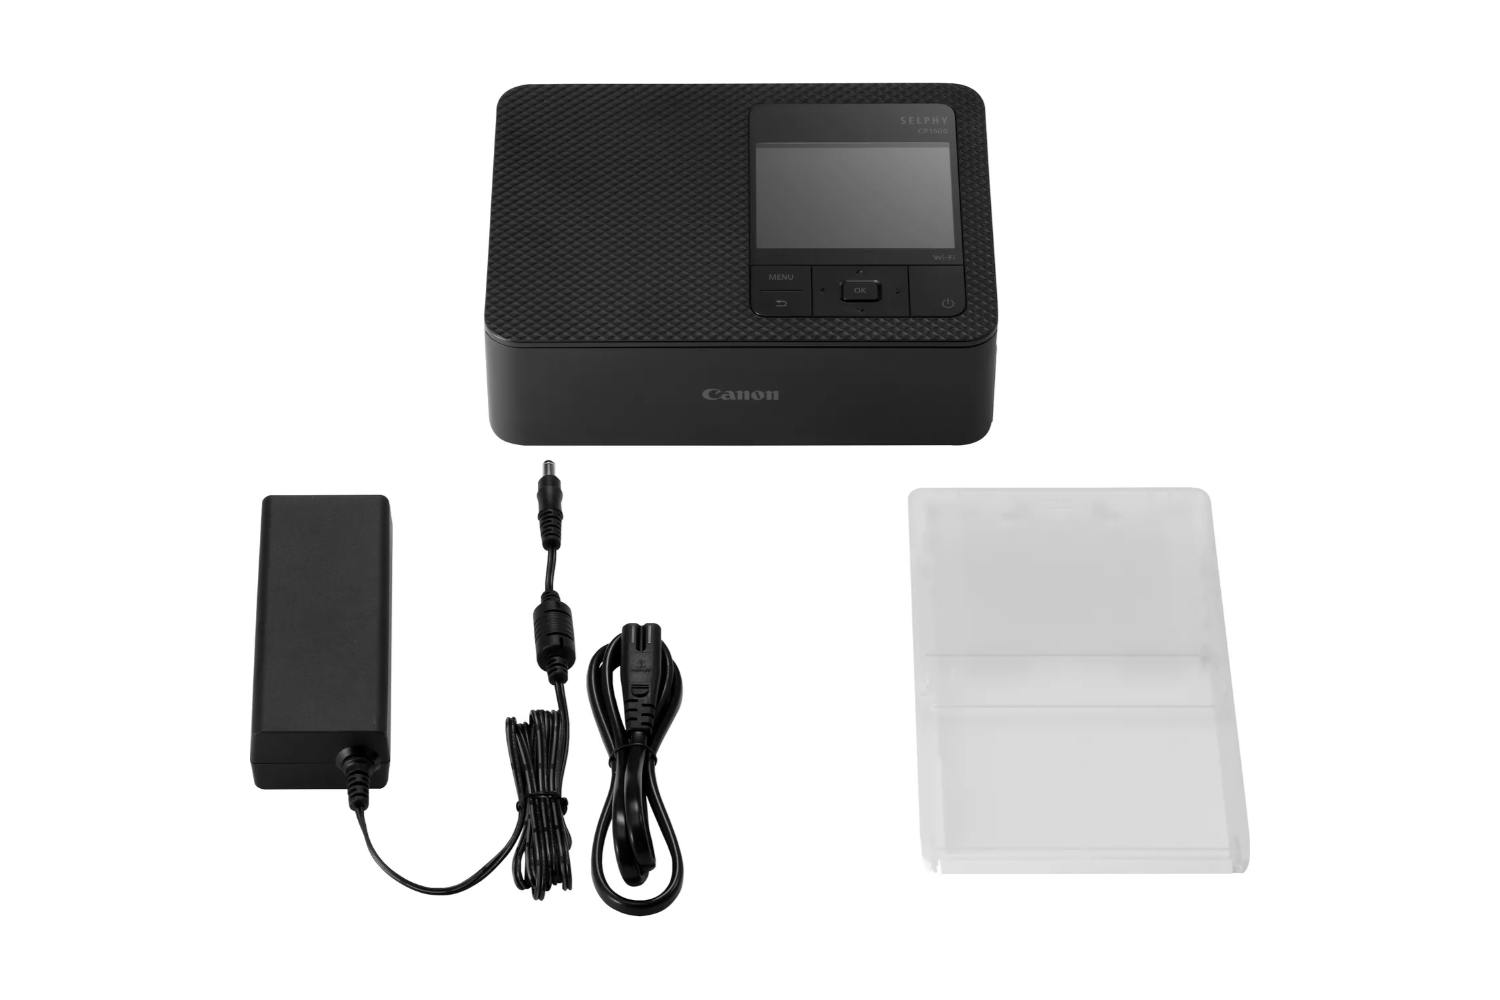 Canon Selphy CP1500 Loading Photo Paper & Installing The Paper